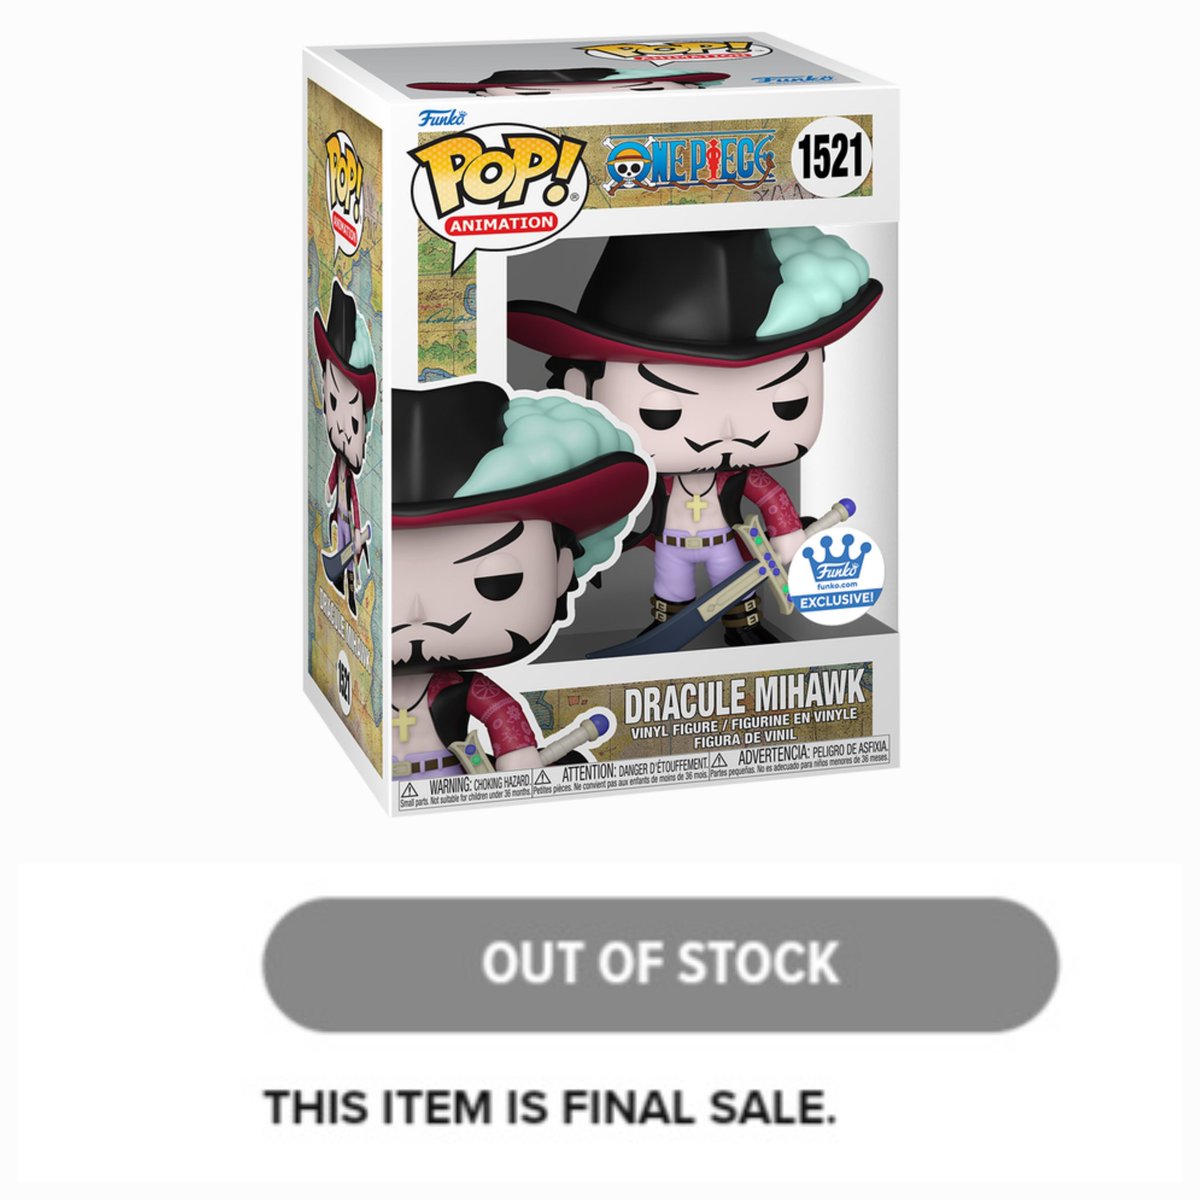 Dang, all 33k sold out before I could get one 👺.
-
#funko #funkopop #funkopopcollection #funkoaddict #funkopops #funkocollector #anime #manga #funkofamily #skittlerampage #onepieceanime #onepiece #luffy